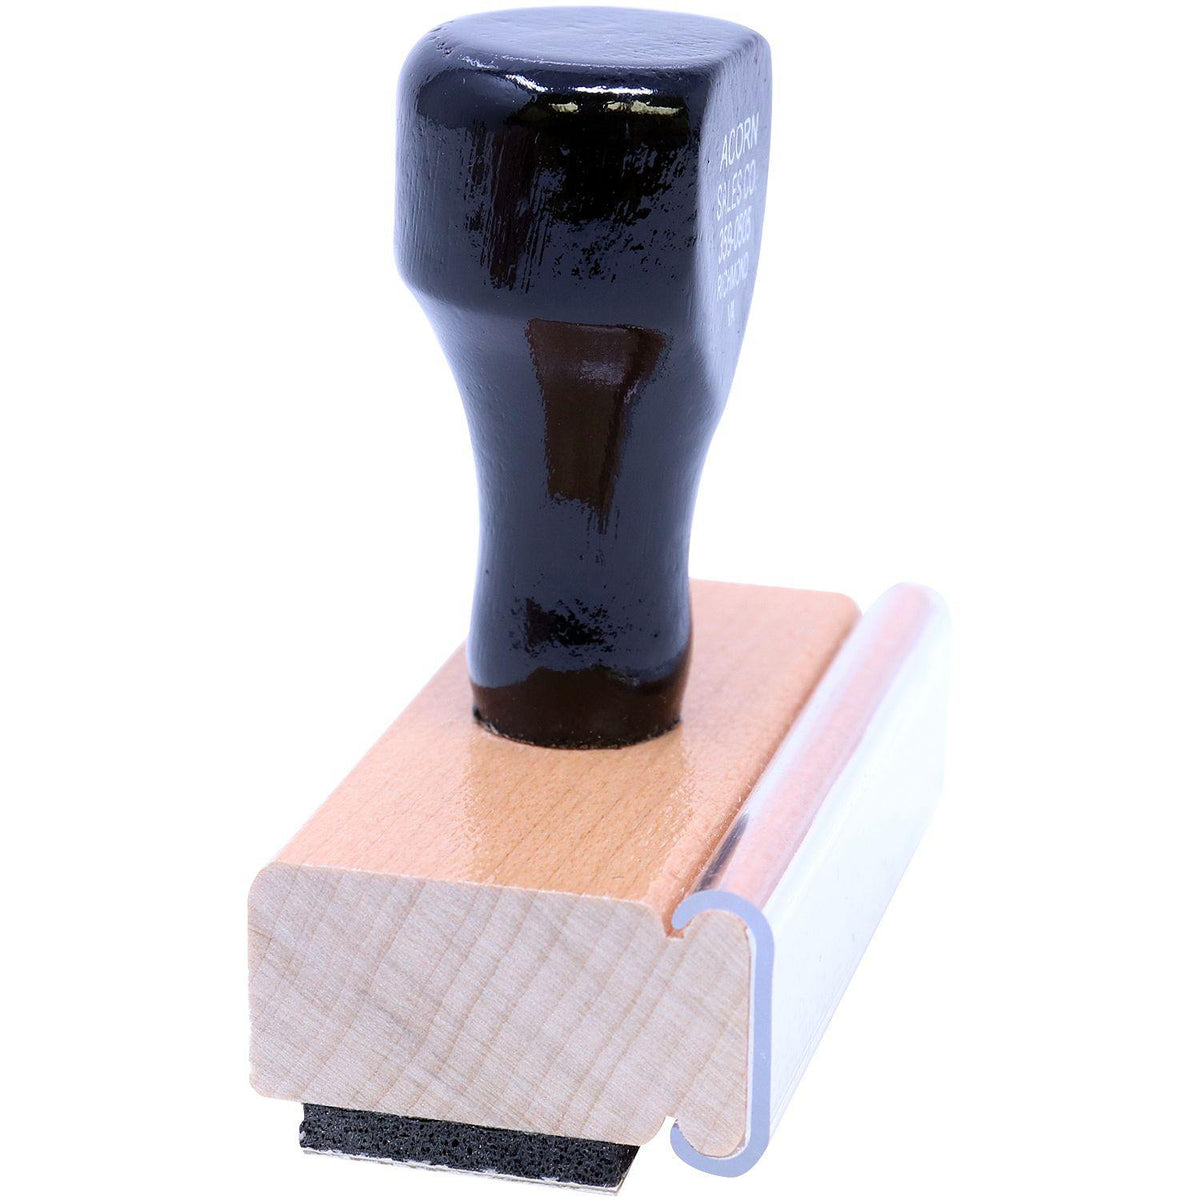 Side View of Large Credit Outline Rubber Stamp at an Angle